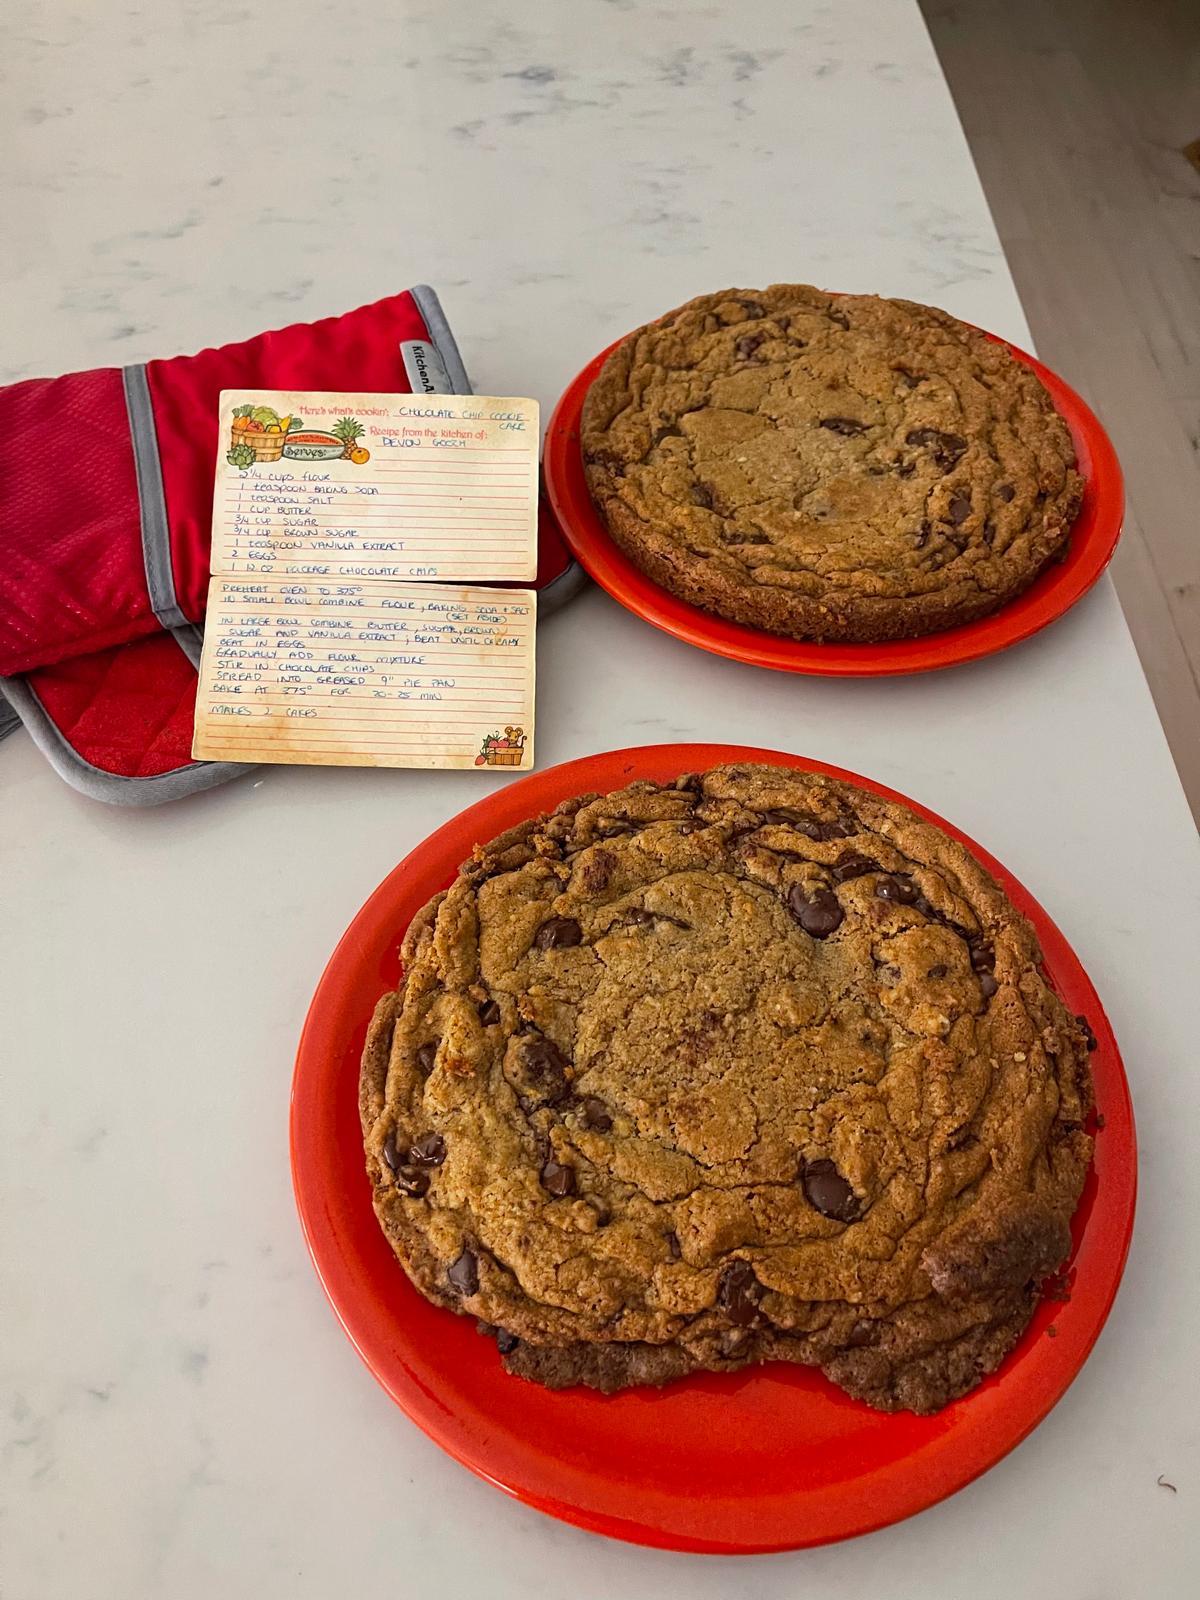 This recipe makes two cookie cakes—one to keep and one to give away. (Courtesy of Maria C. Garriga)